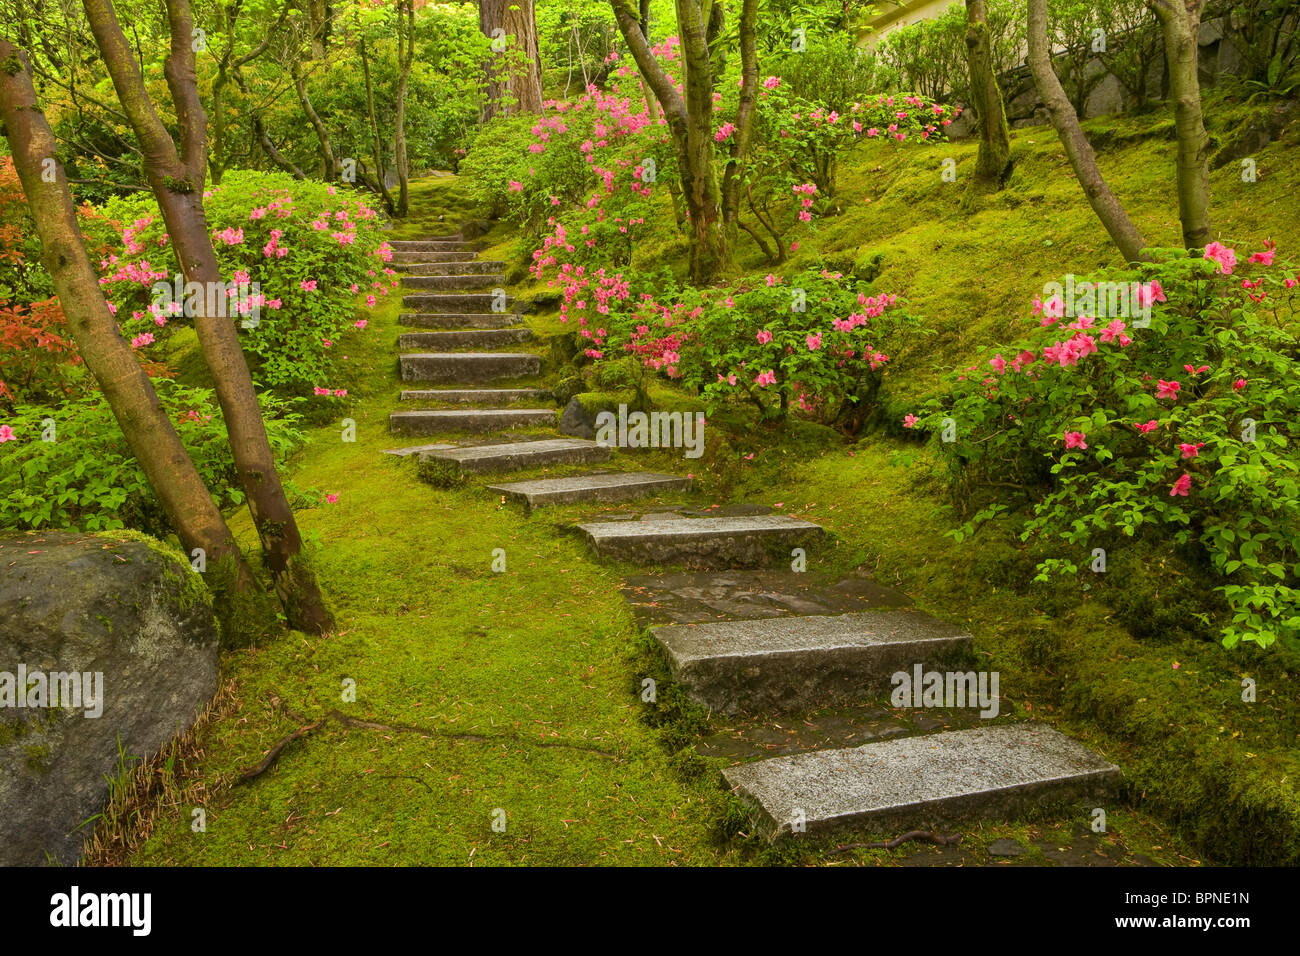 Azaleas and stairs in the Natural Garden of Portland's Japanese Garden, Oregon Stock Photo